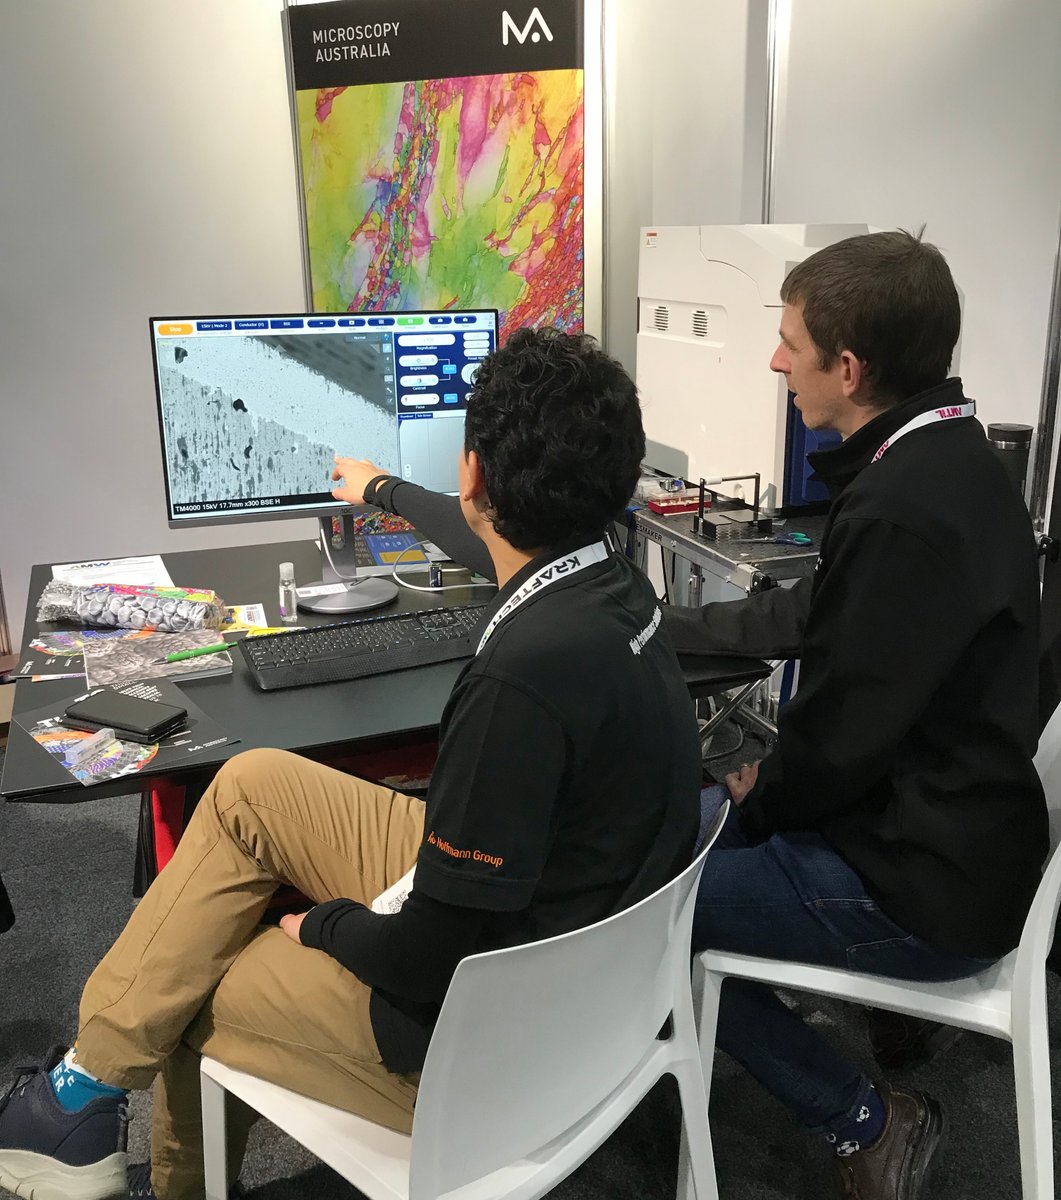 Do you have small parts, materials or products you’d like to look at under an electron microscope? Bring them to us @micro_au – booth 218 at #AMW2024 and we’ll pop them straight in our microscope while you wait. #failureanalysis #SEM #imaging #analysis